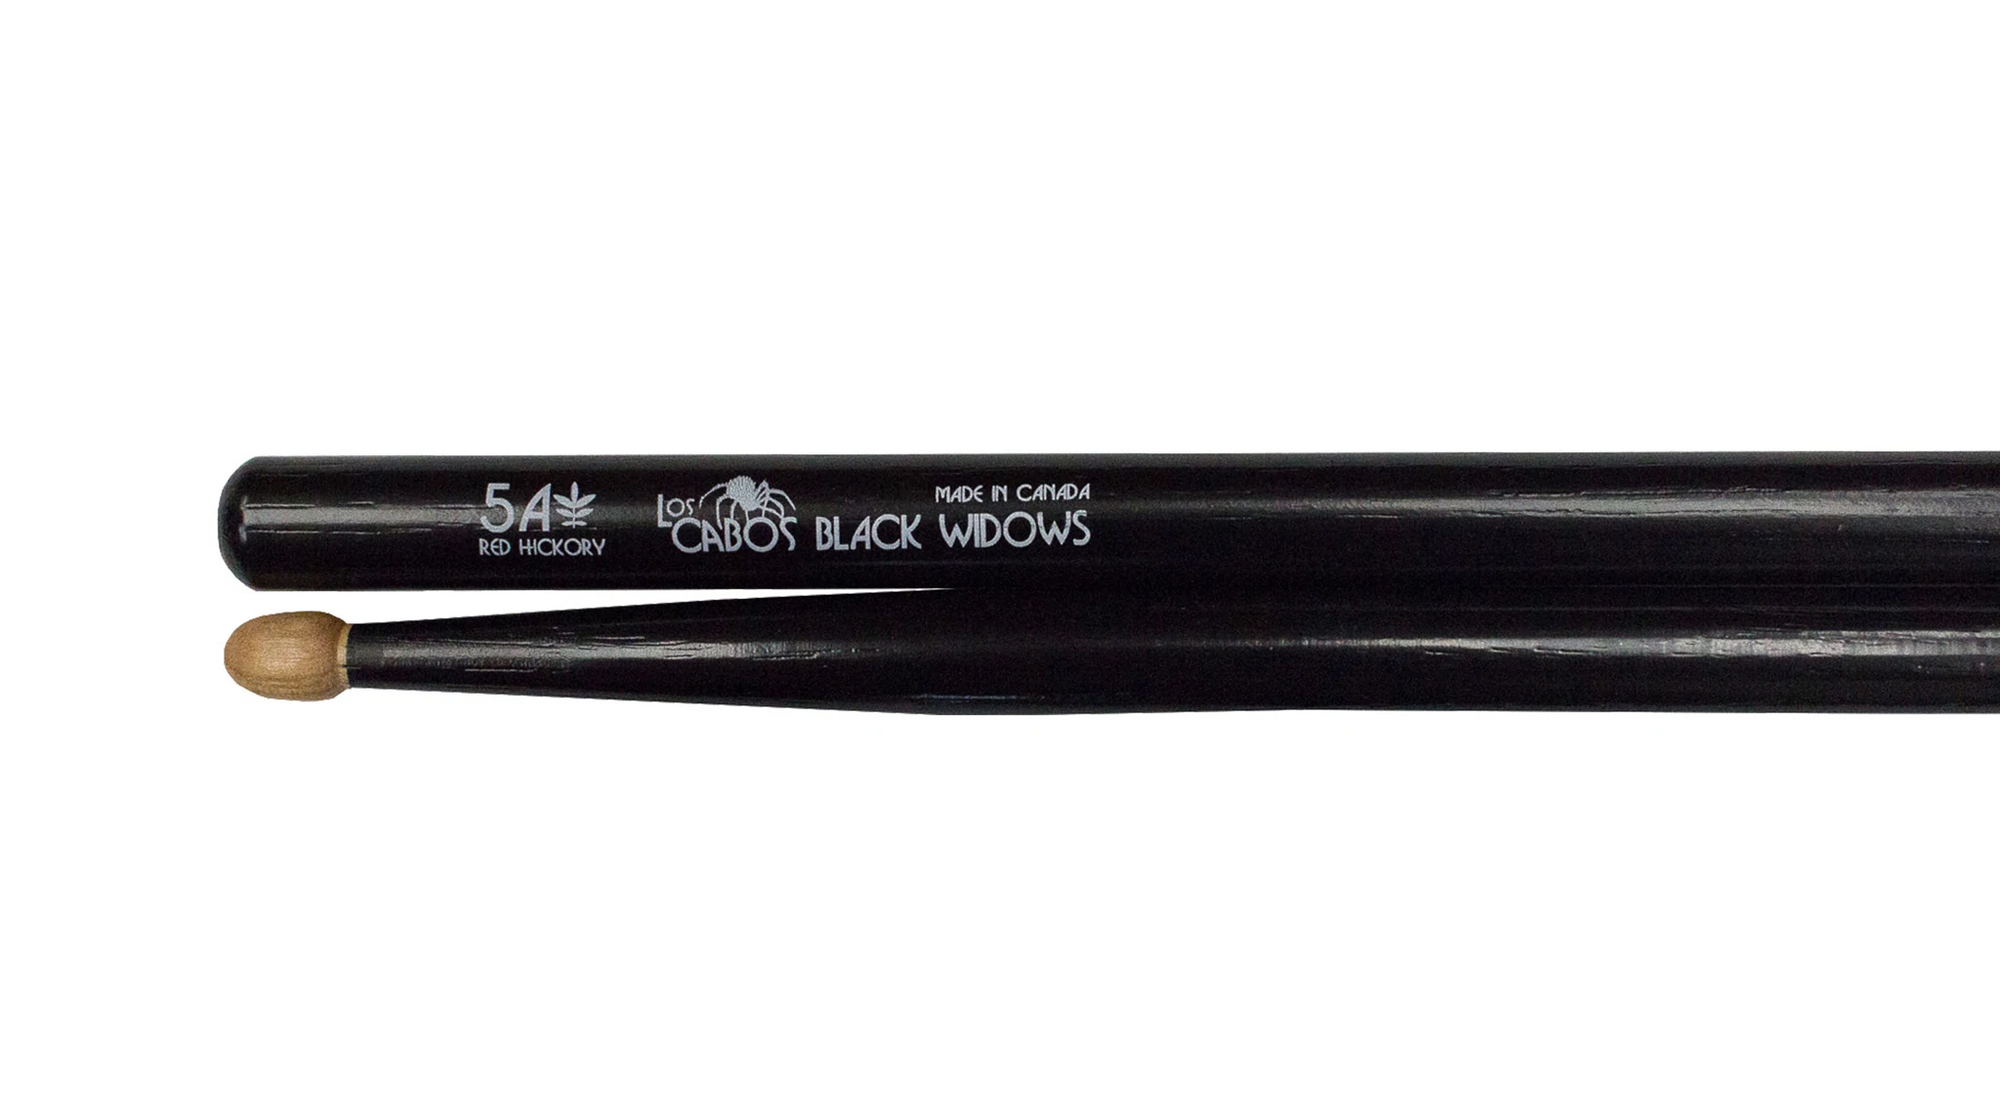 Los Cabos Red Hickory 'Black Widow' Drumsticks